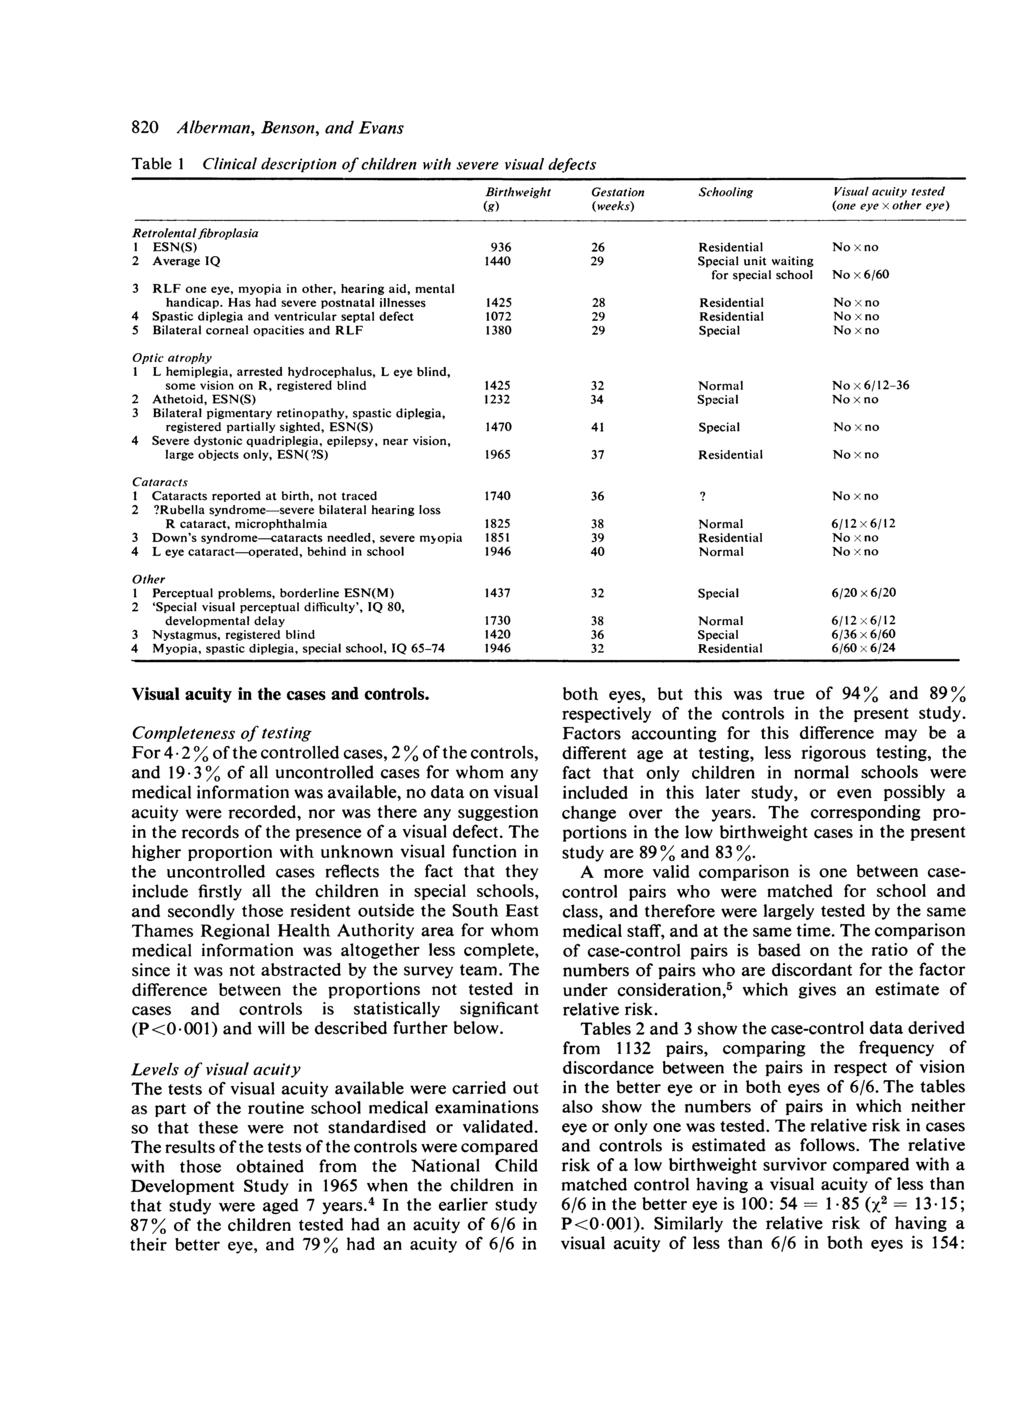 820 Alberman, Benson, and Evans Table I Clinical description of children with severe visual defects Birthweight Gestation Schooling Visual acuity tested (g) (weeks) (one eye x other eye)